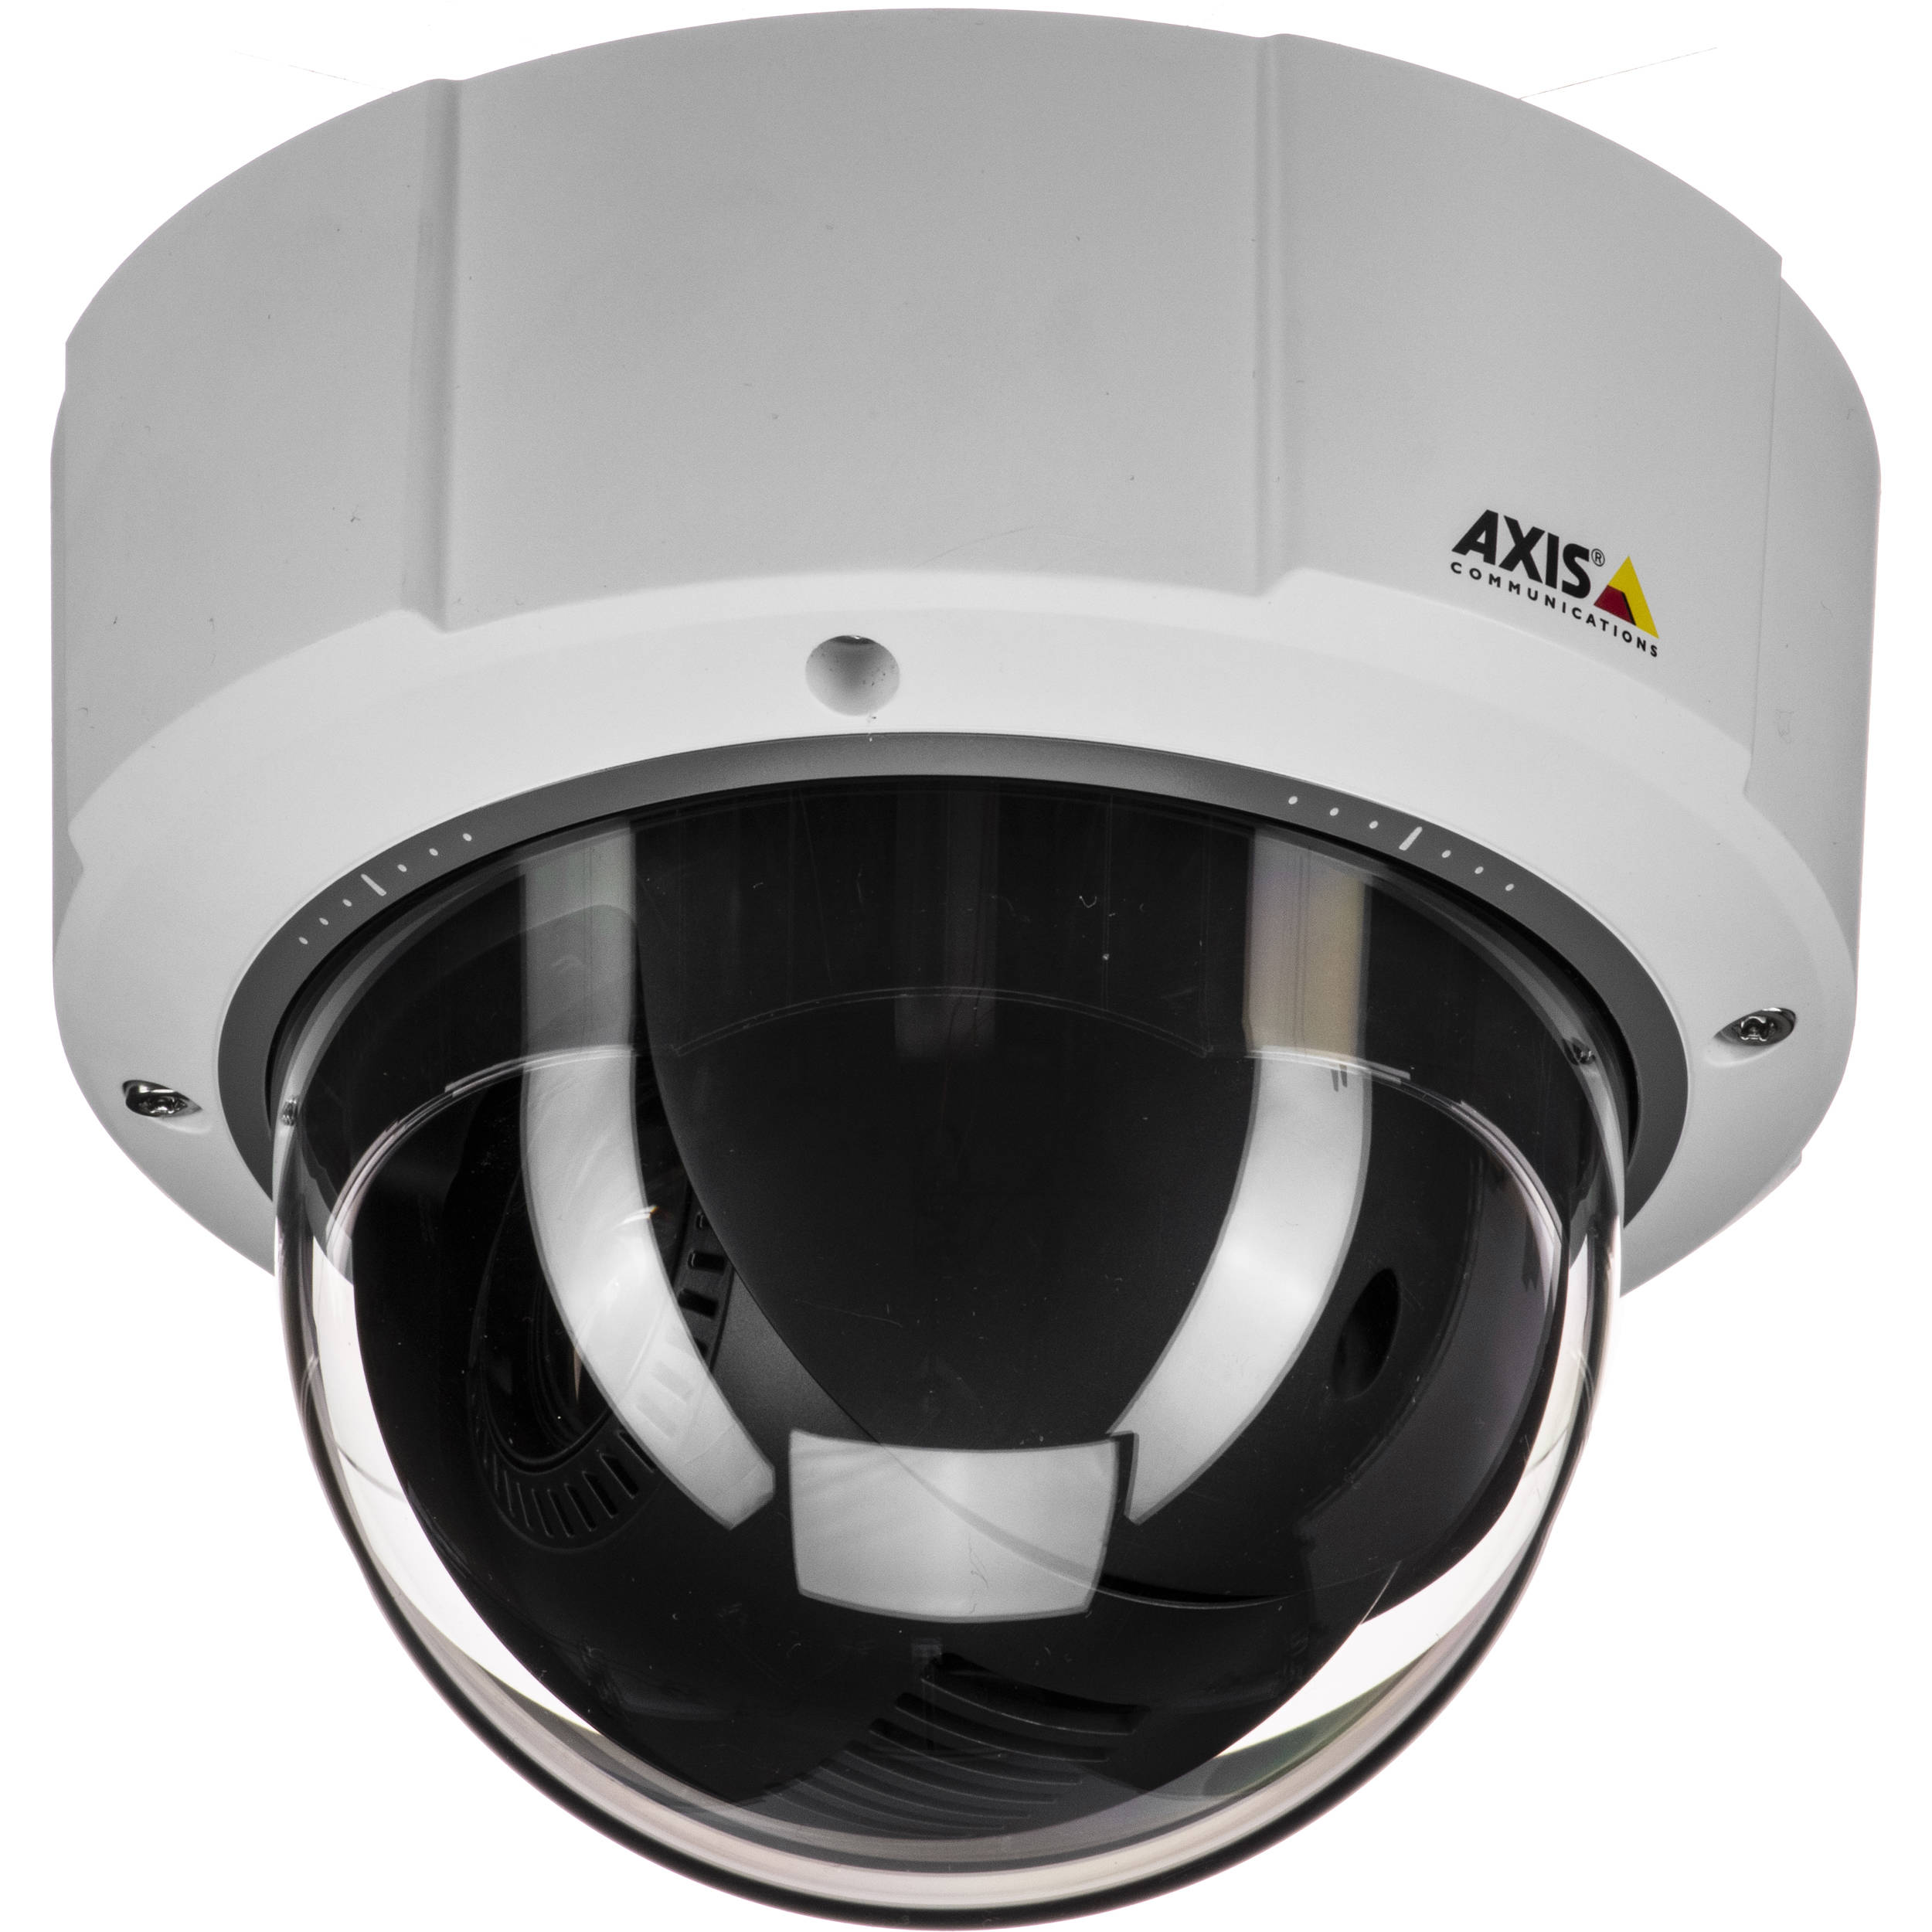 Axis M5014 PTZ Dome Network Camera 0399-001 for sale online 